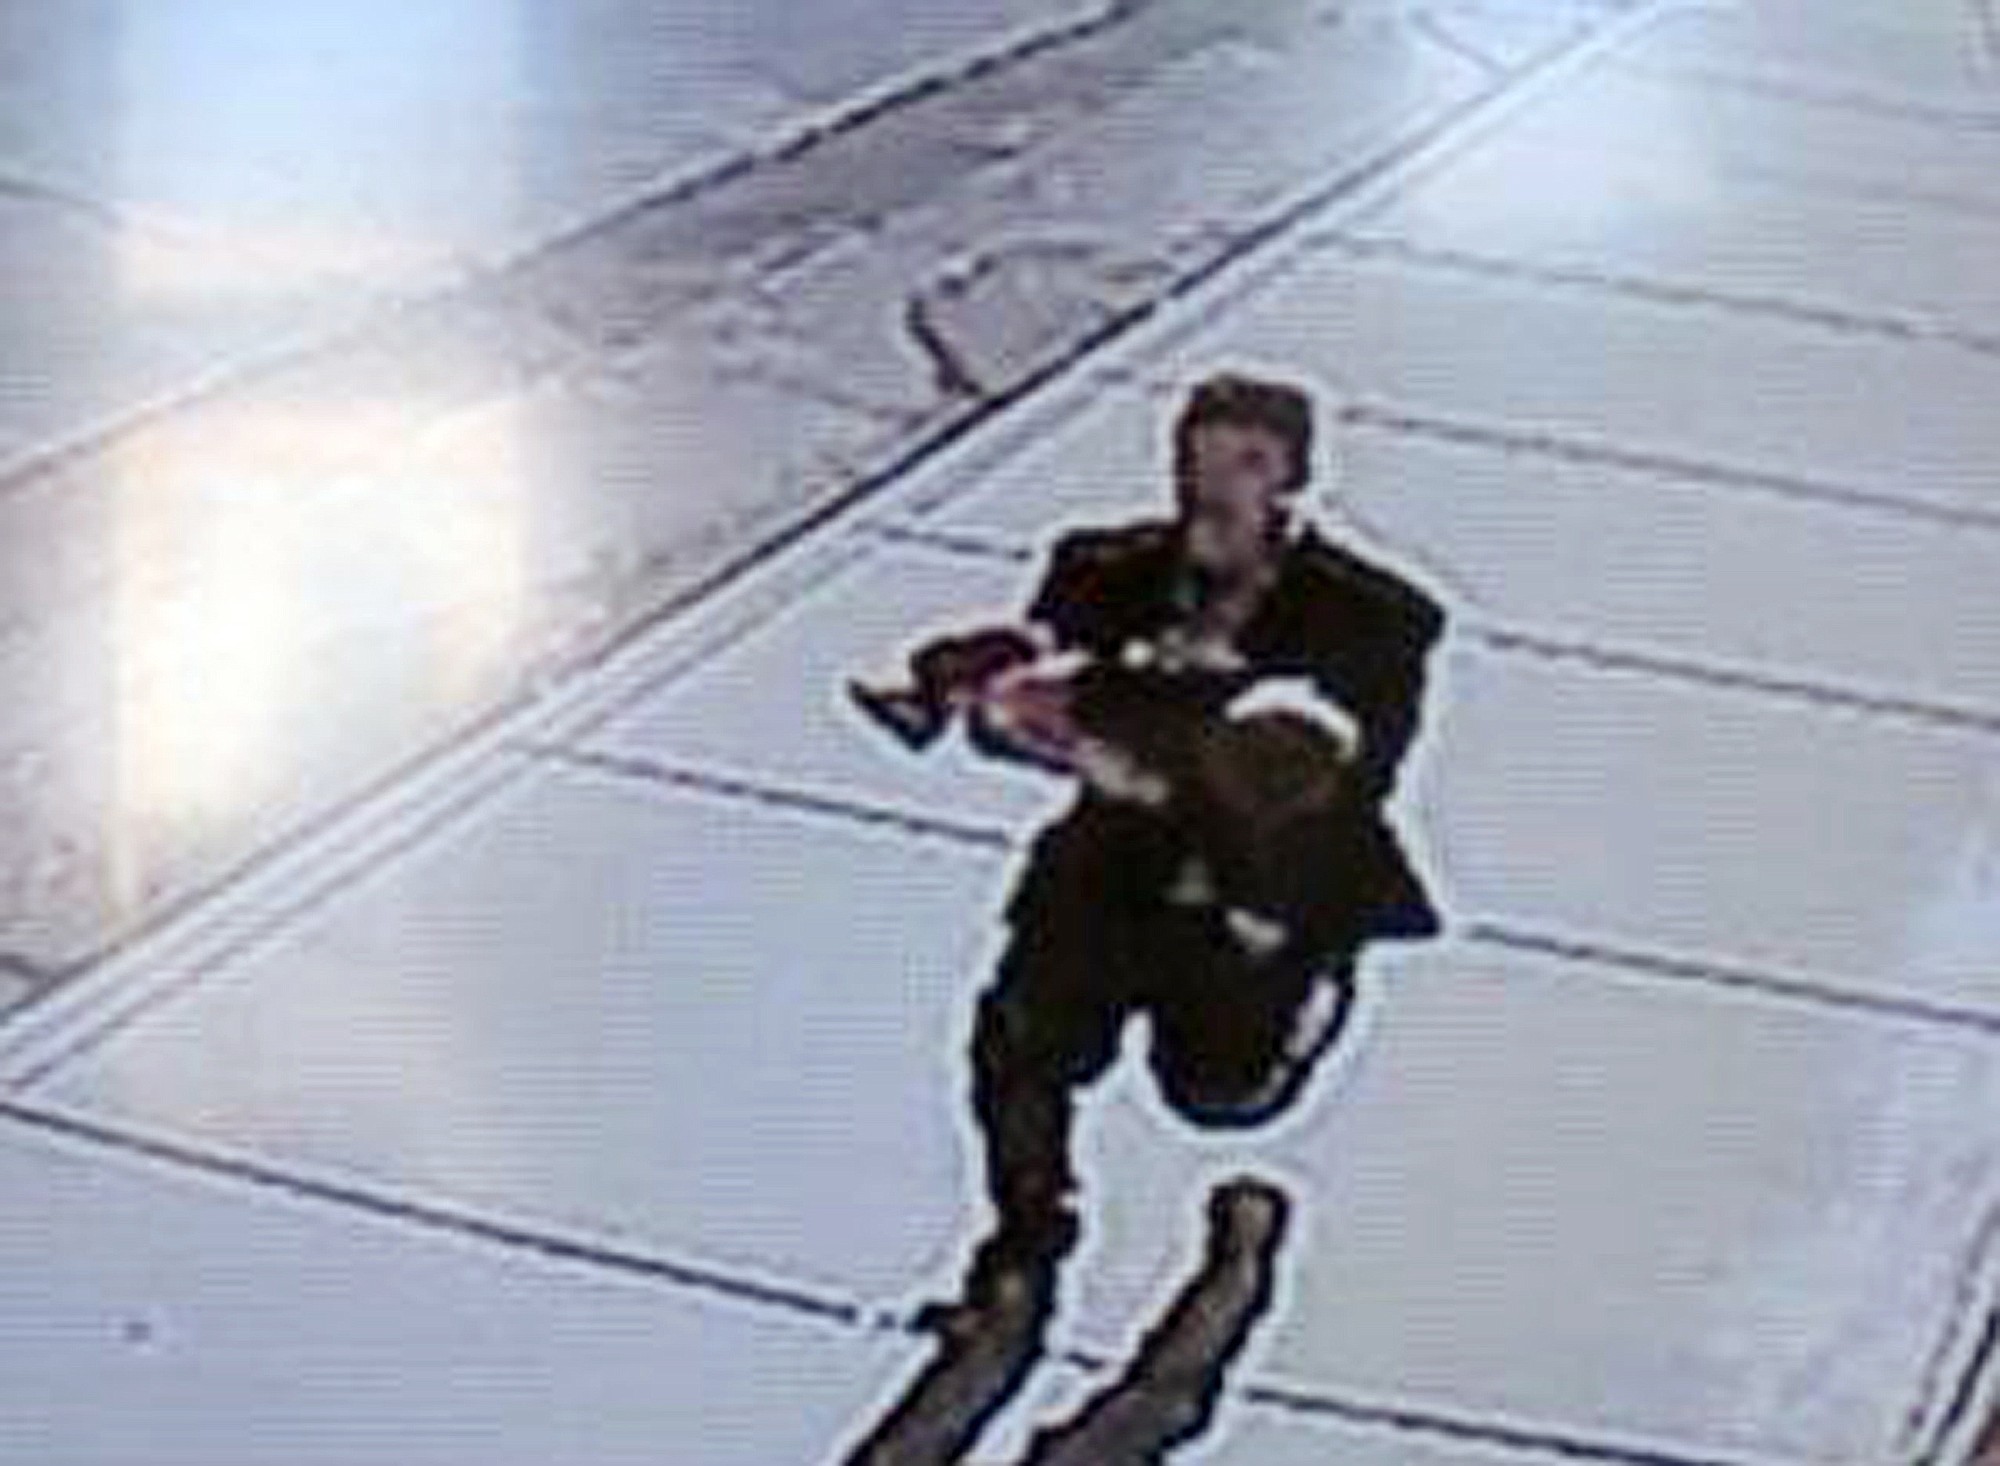 In this image taken from surveillance video on March 8, a man runs down a street, carrying a toddler in an apparent kidnapping attempt in Sprague.